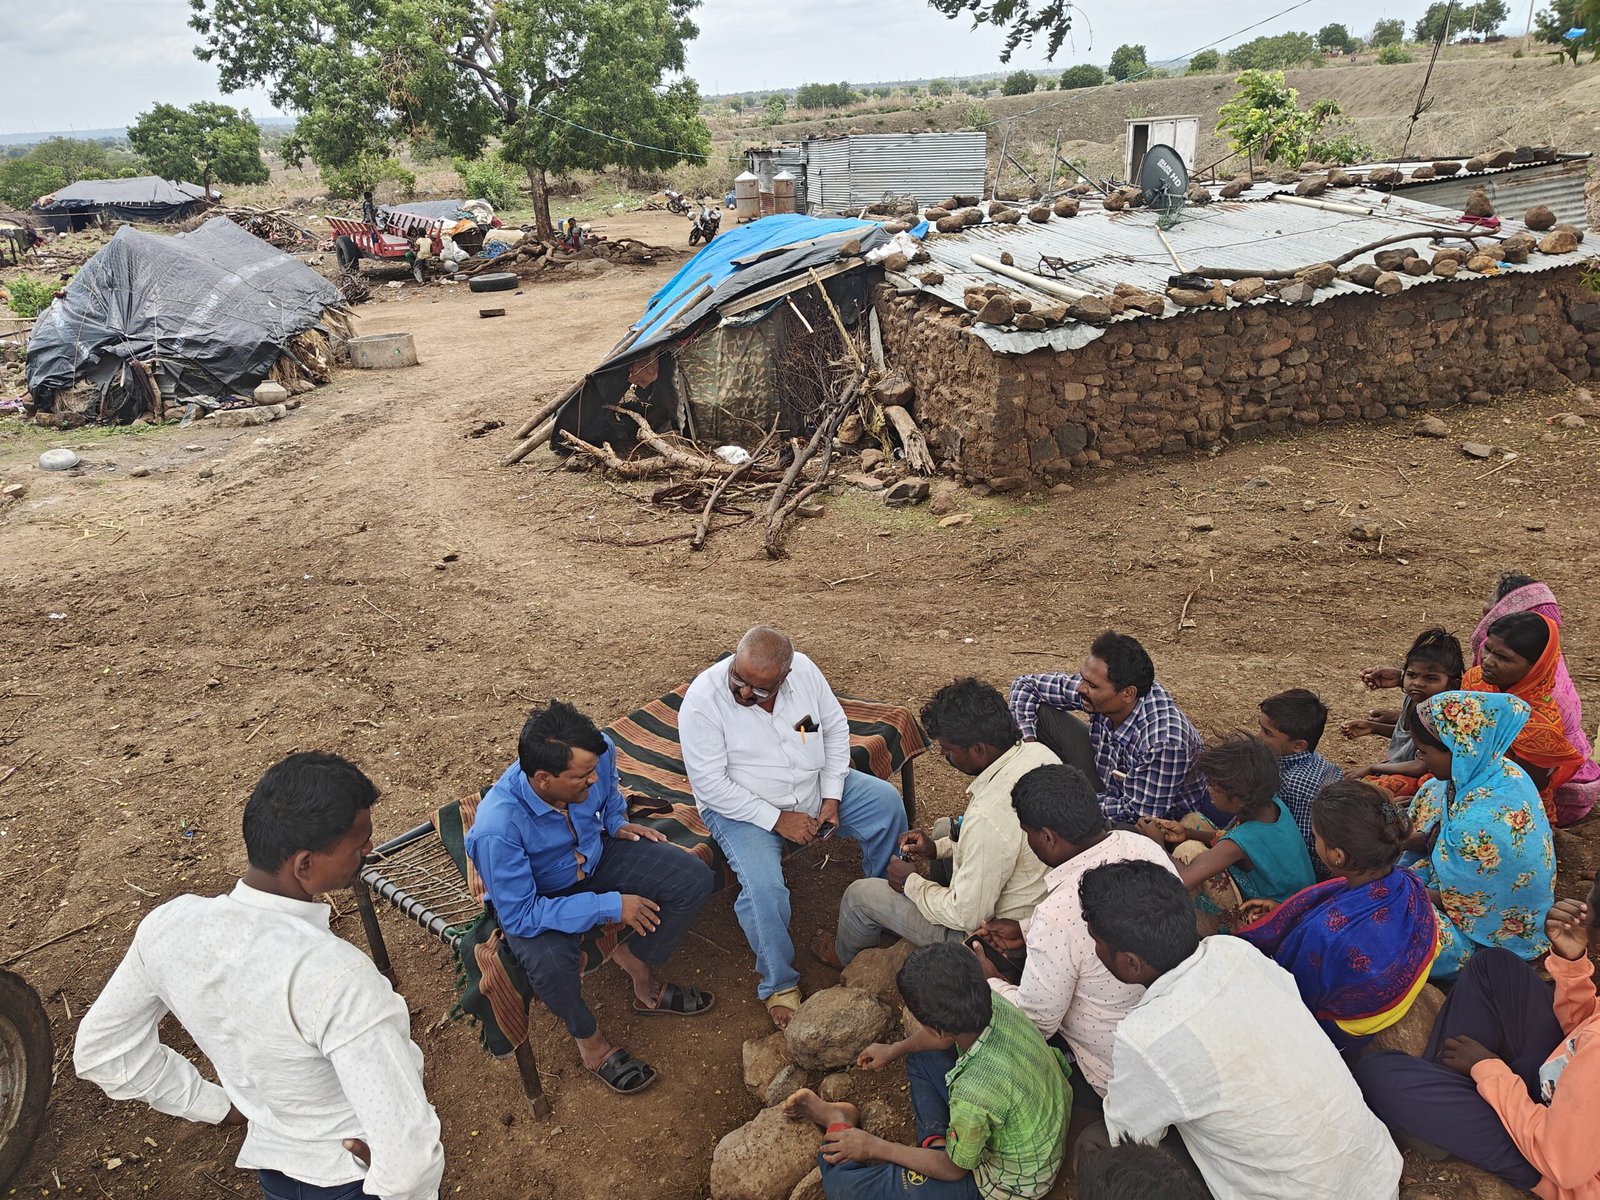 Tangde and Kamble talk with a group of people in a rural village.